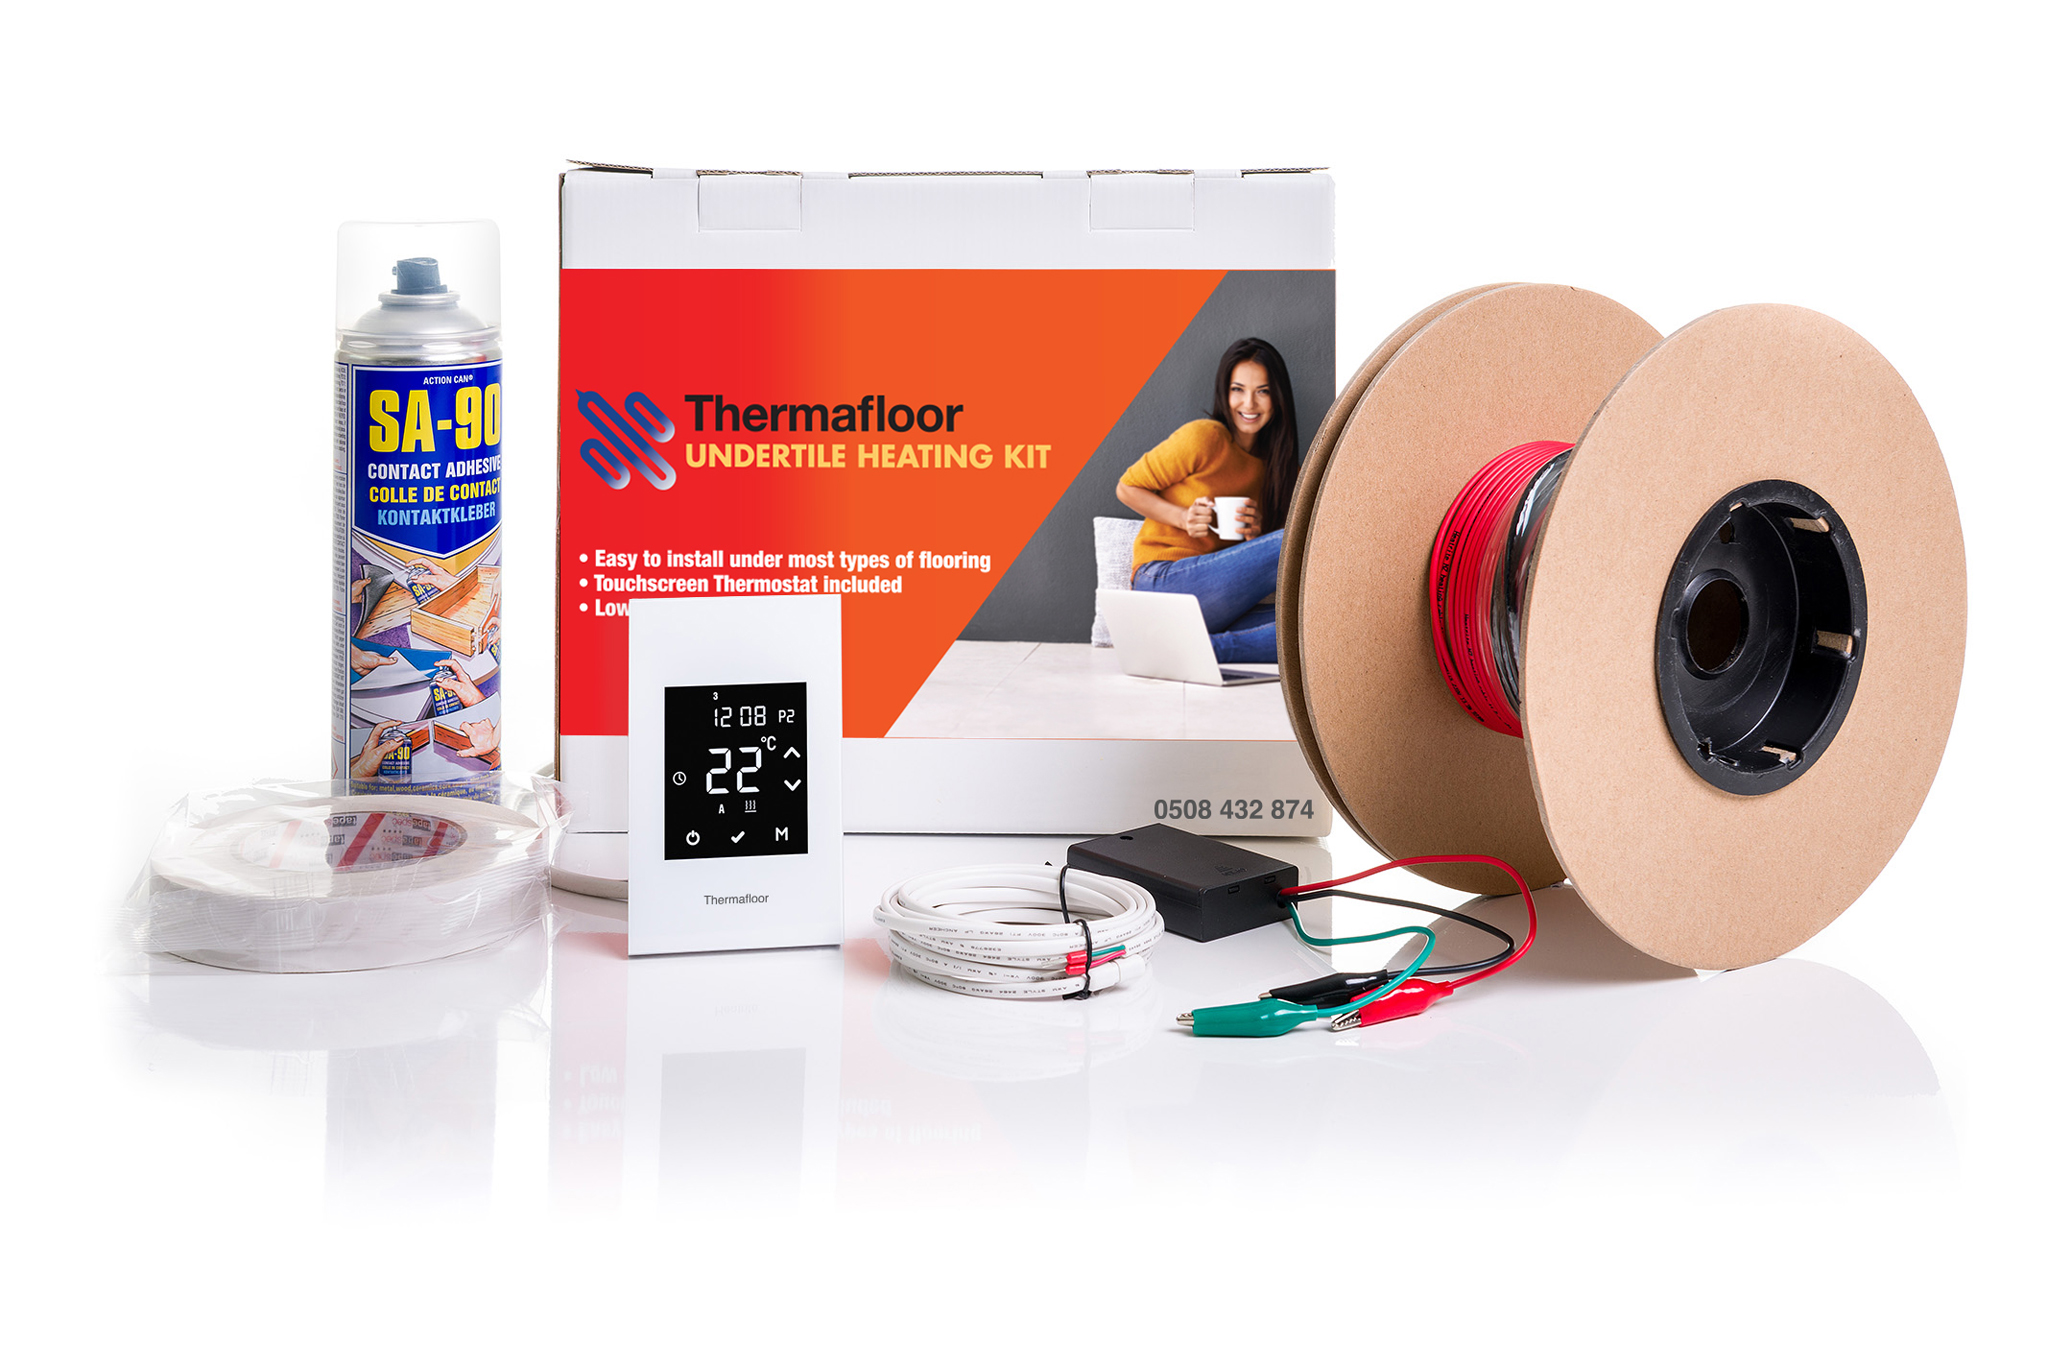 Thermafloor New Zealand under tile heating kit comes with everything you need to do it yourself